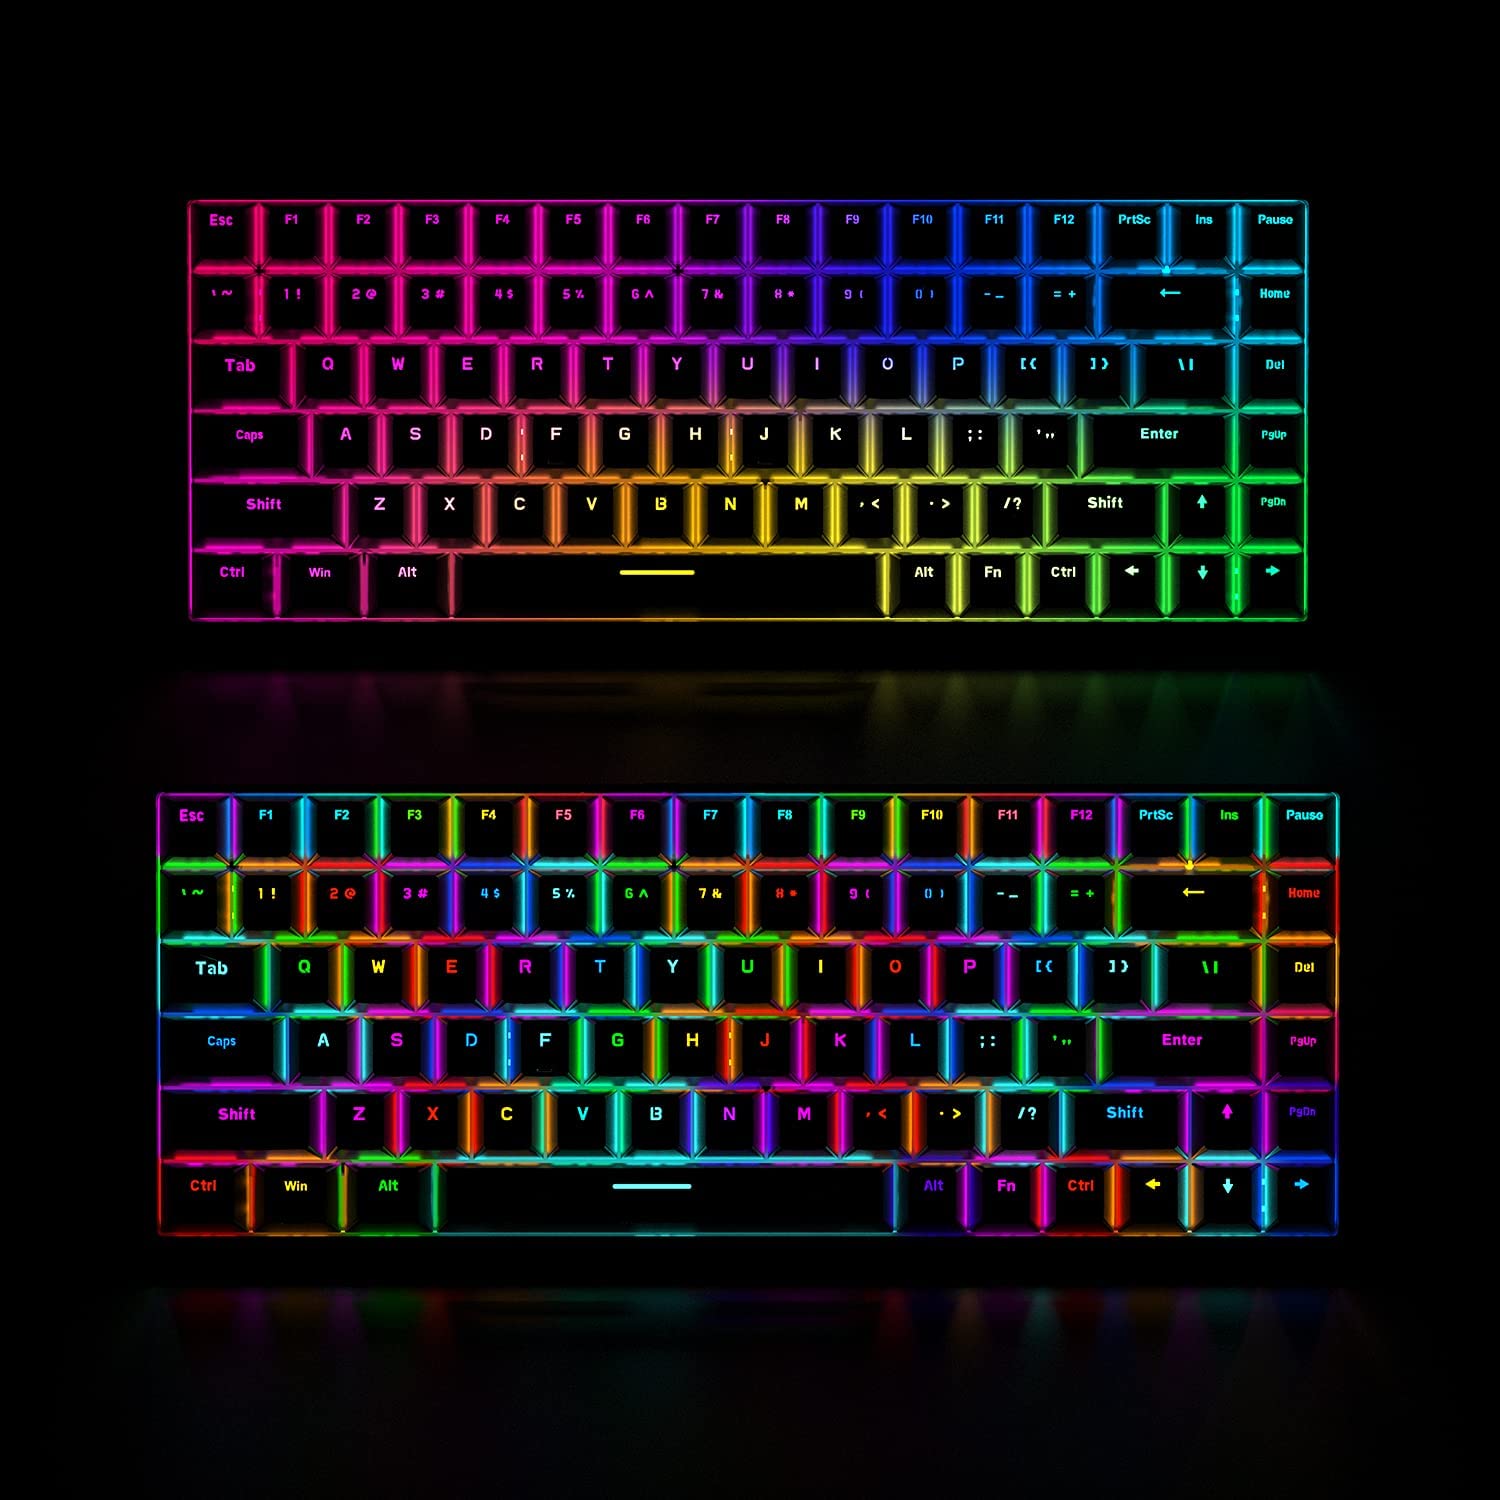 XINMENG XM84 84 Keys 3 Modes Mechanical Keyboard, Bluetooth 5.0/Wireless 2.4G/Wired, Rechargeable 3000mAh Battery, 20 LED Backlit Mode